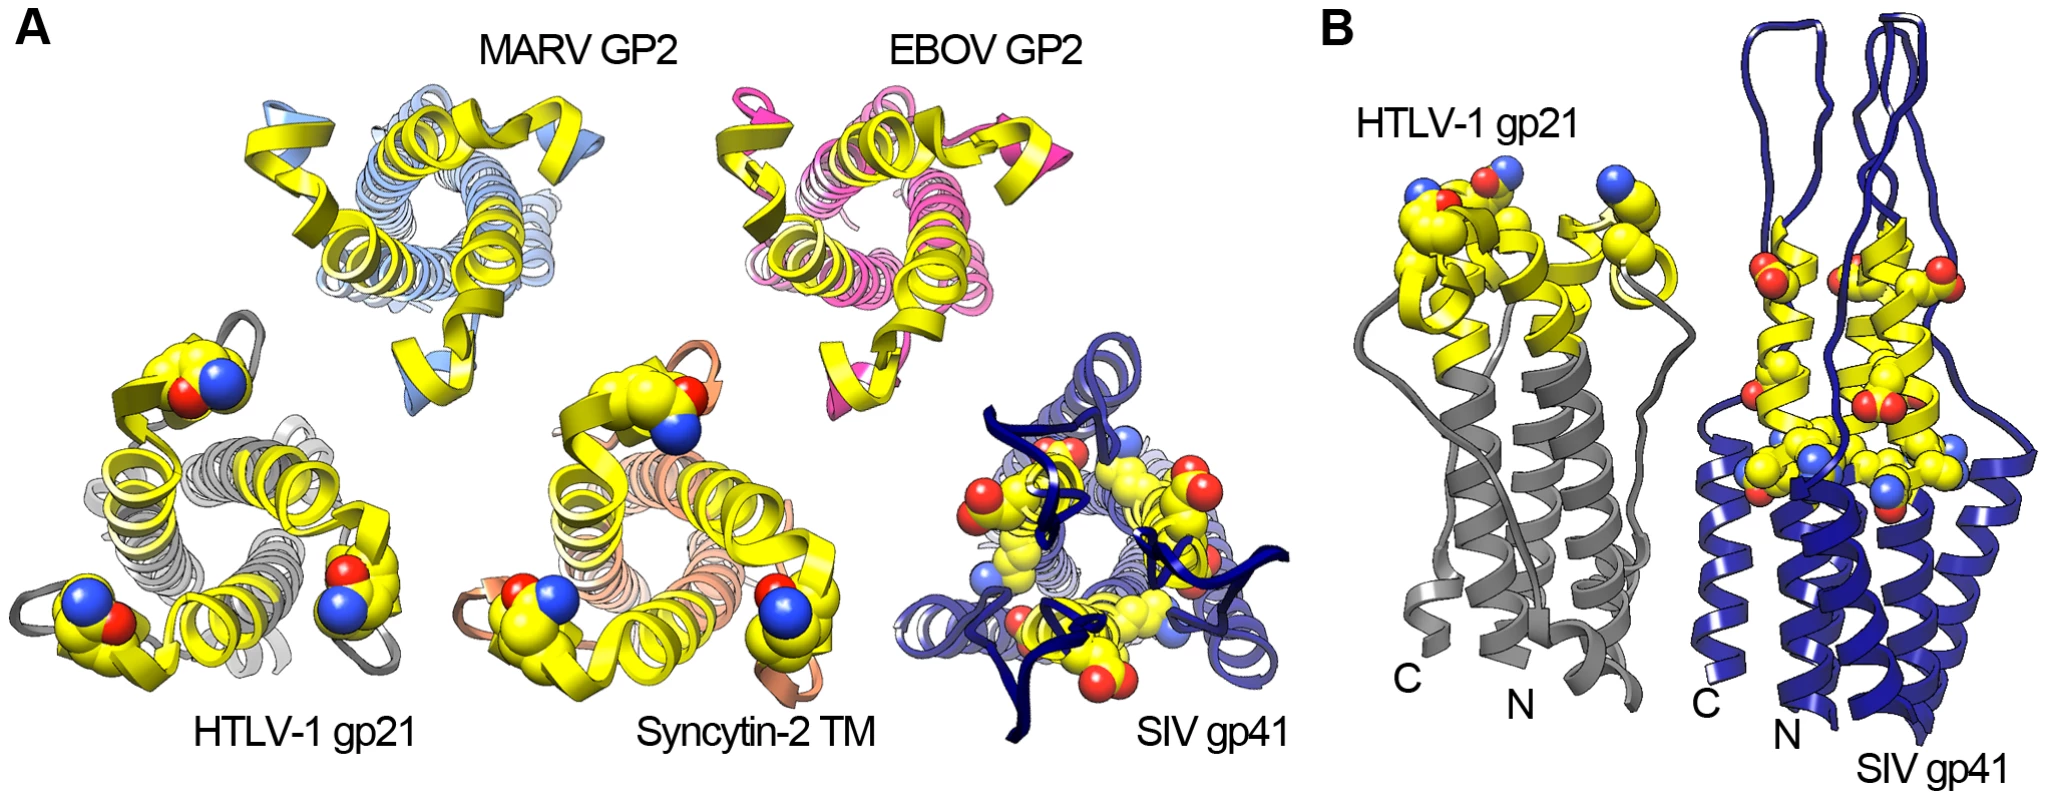 Structural conservation of the viral glycoprotein immunomodulatory region.